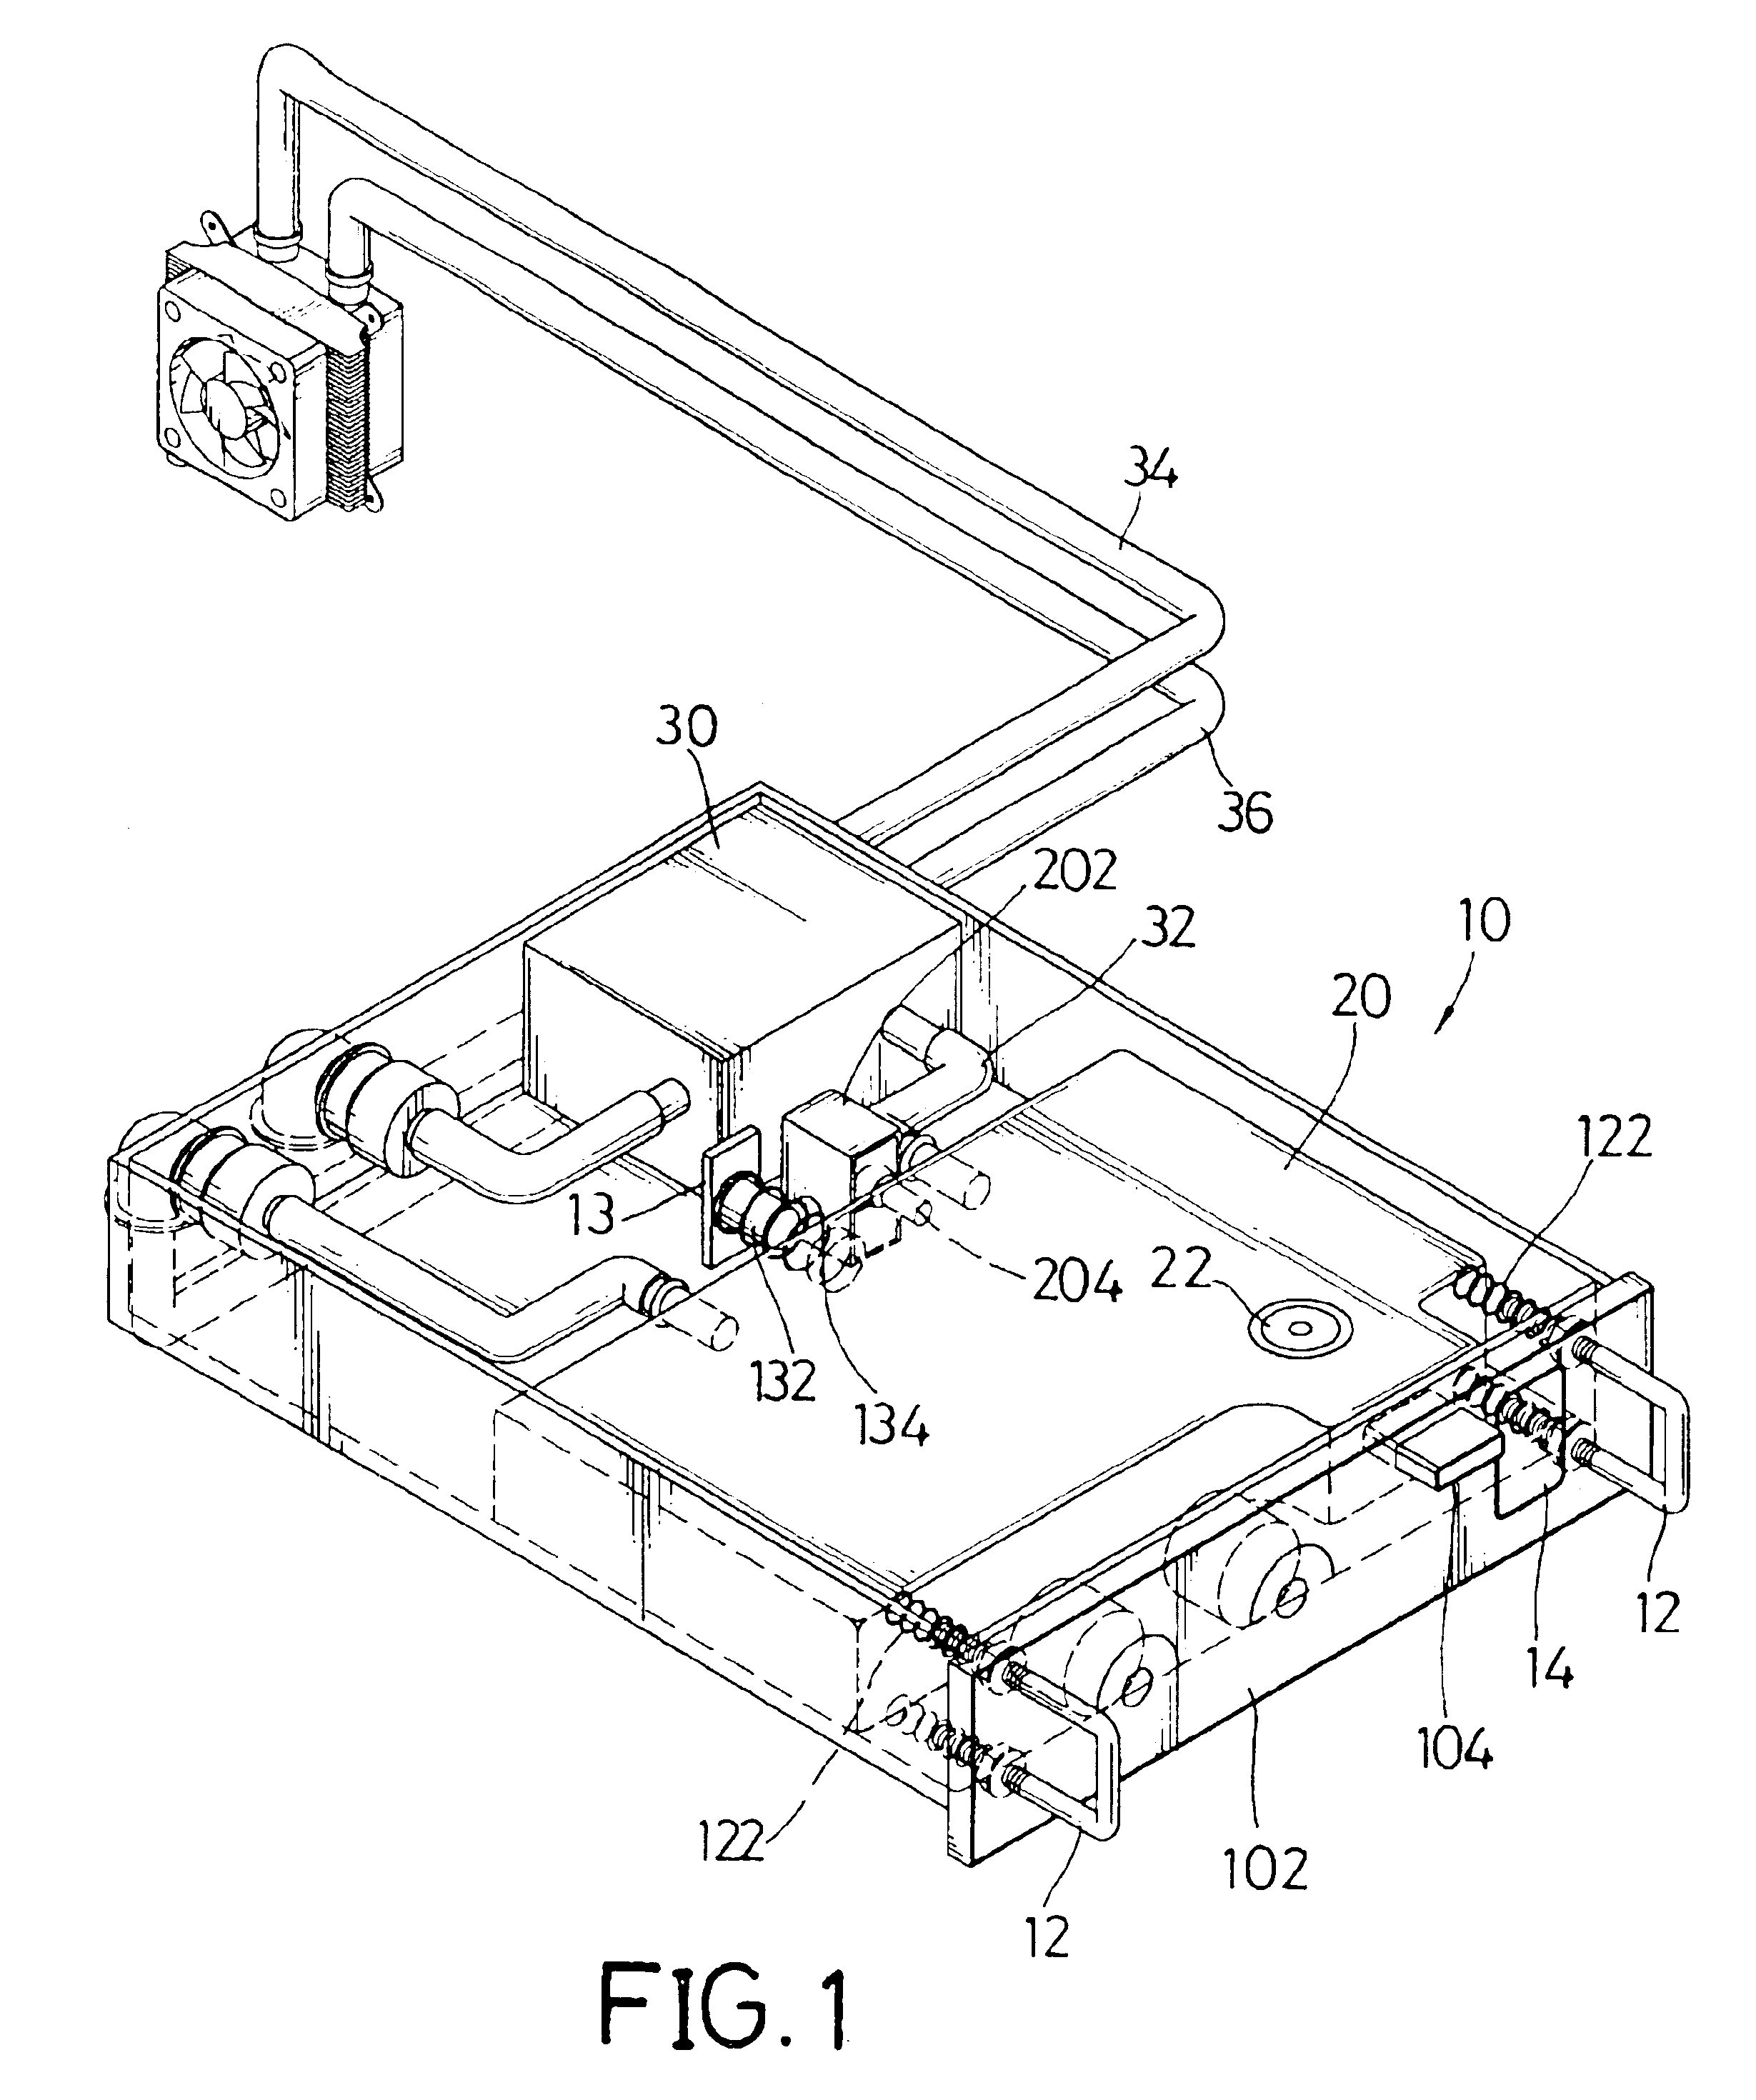 Cartridge assembly of a water cooled radiator